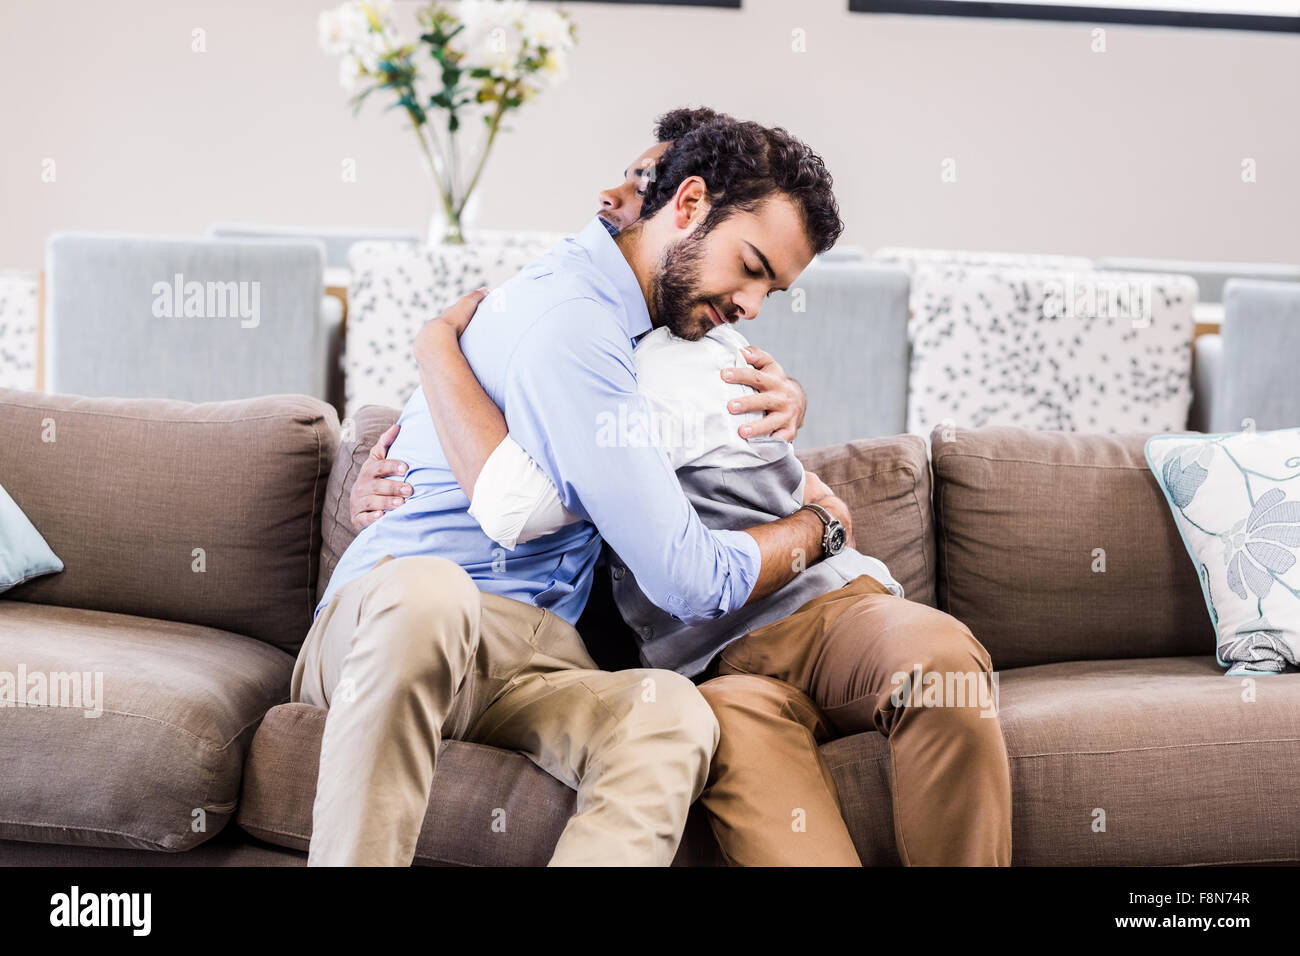 Gay Love High Resolution Stock Photography and Images - Alamy